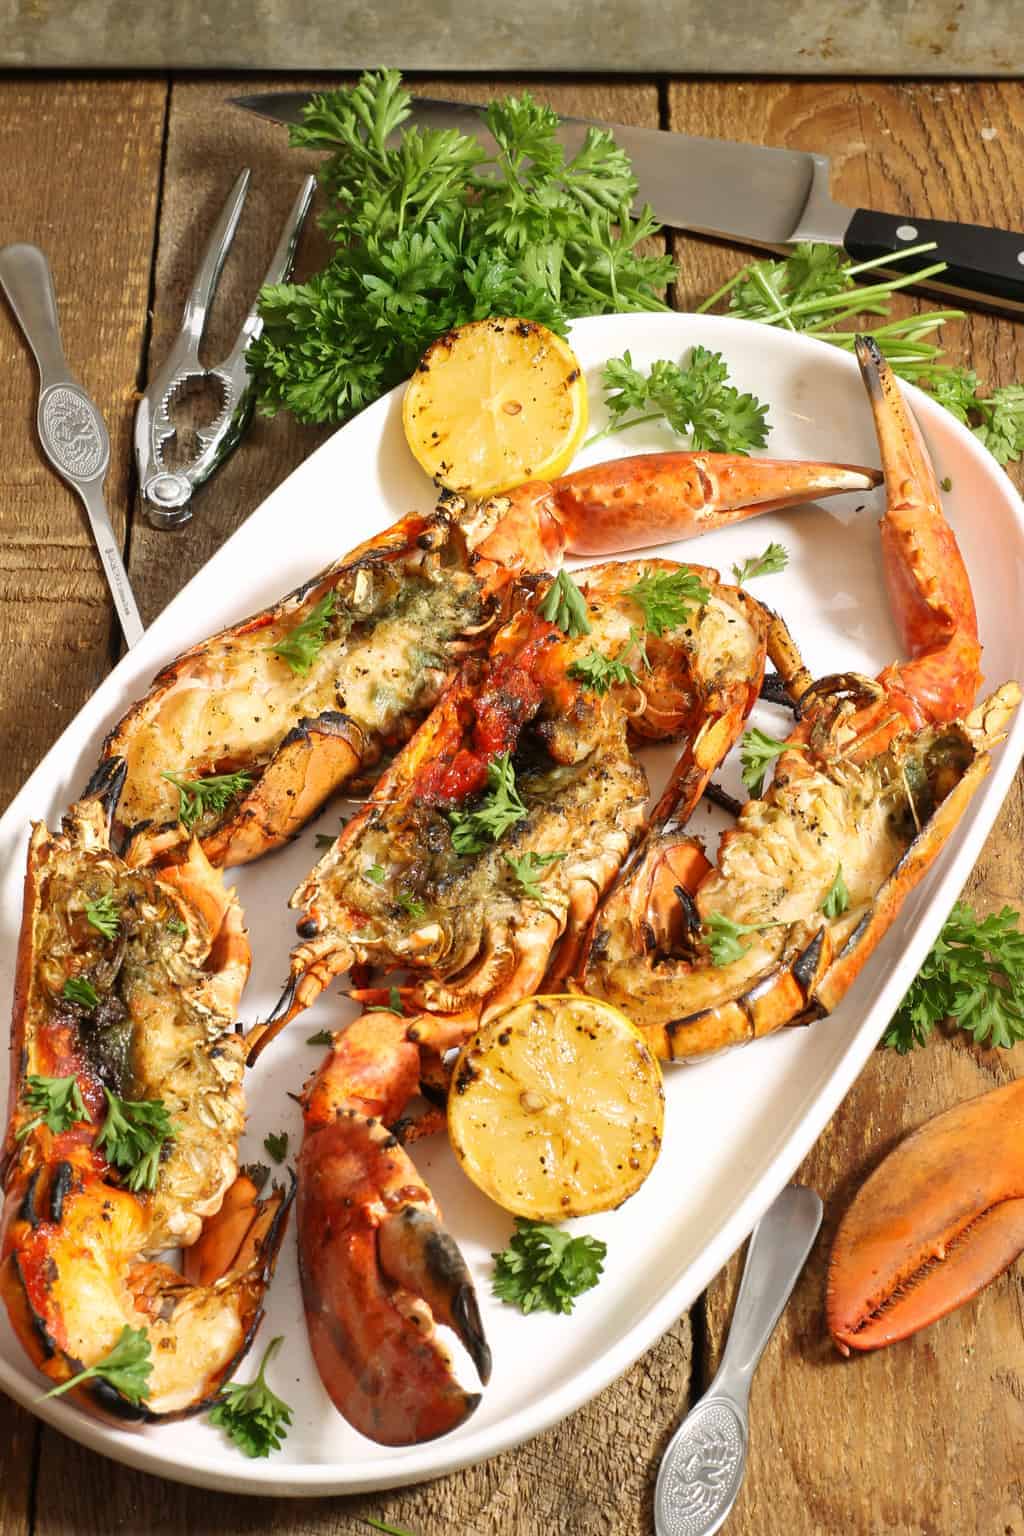 a large platter of whole grilled lobsters. The perfect gourmet BBQ meal or entree served at New Years